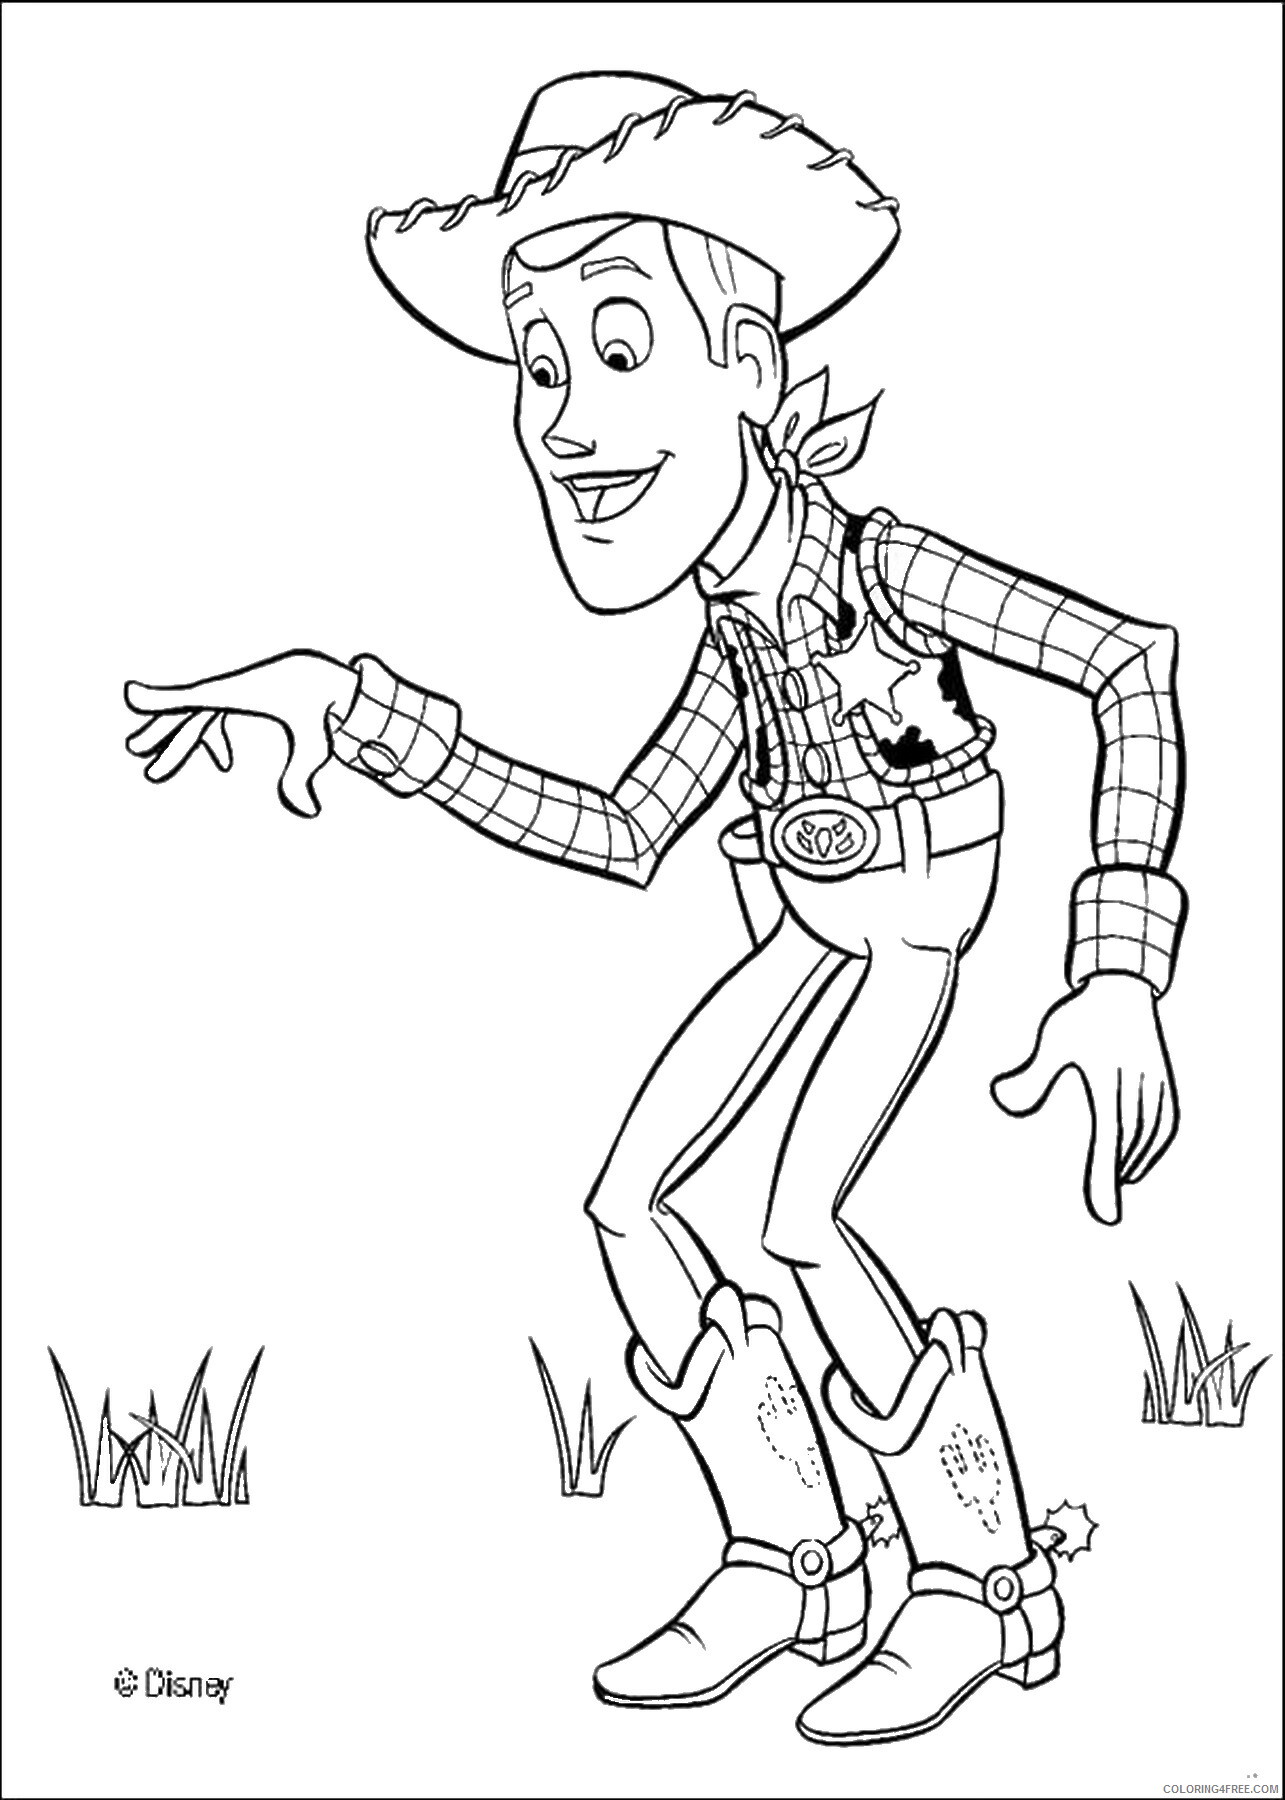 Toy Story Coloring Pages TV Film toystory_19 Printable 2020 10376 Coloring4free